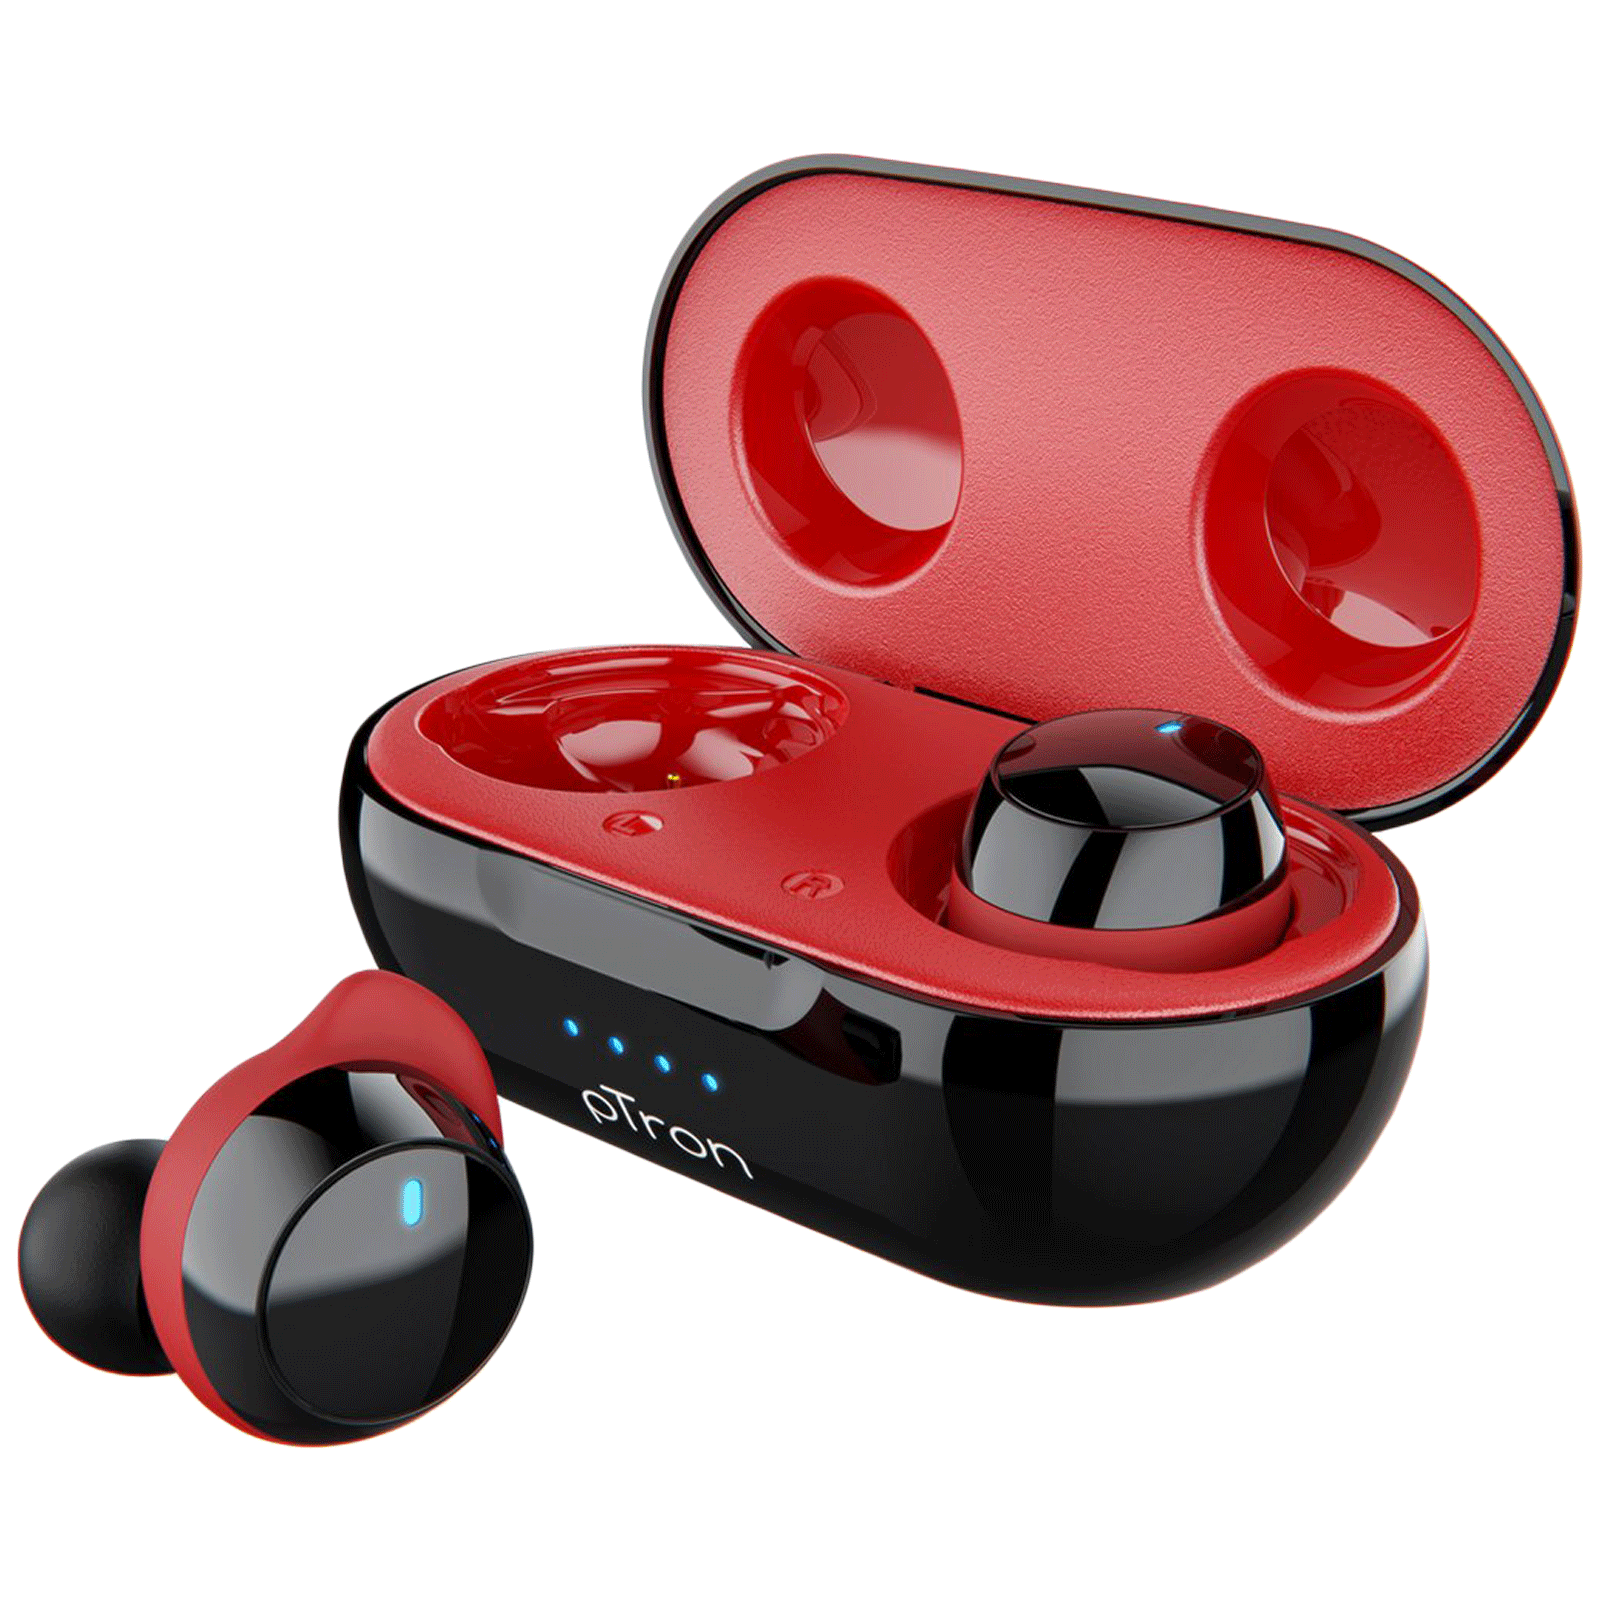 PTron - pTron Bassbuds Evo In-Ear Passive noise Cancellation Truely Wireless Earbuds with Mic (Bluetooth 5.0, 8mm Dynamic Driver, 140317860, Black/Red)